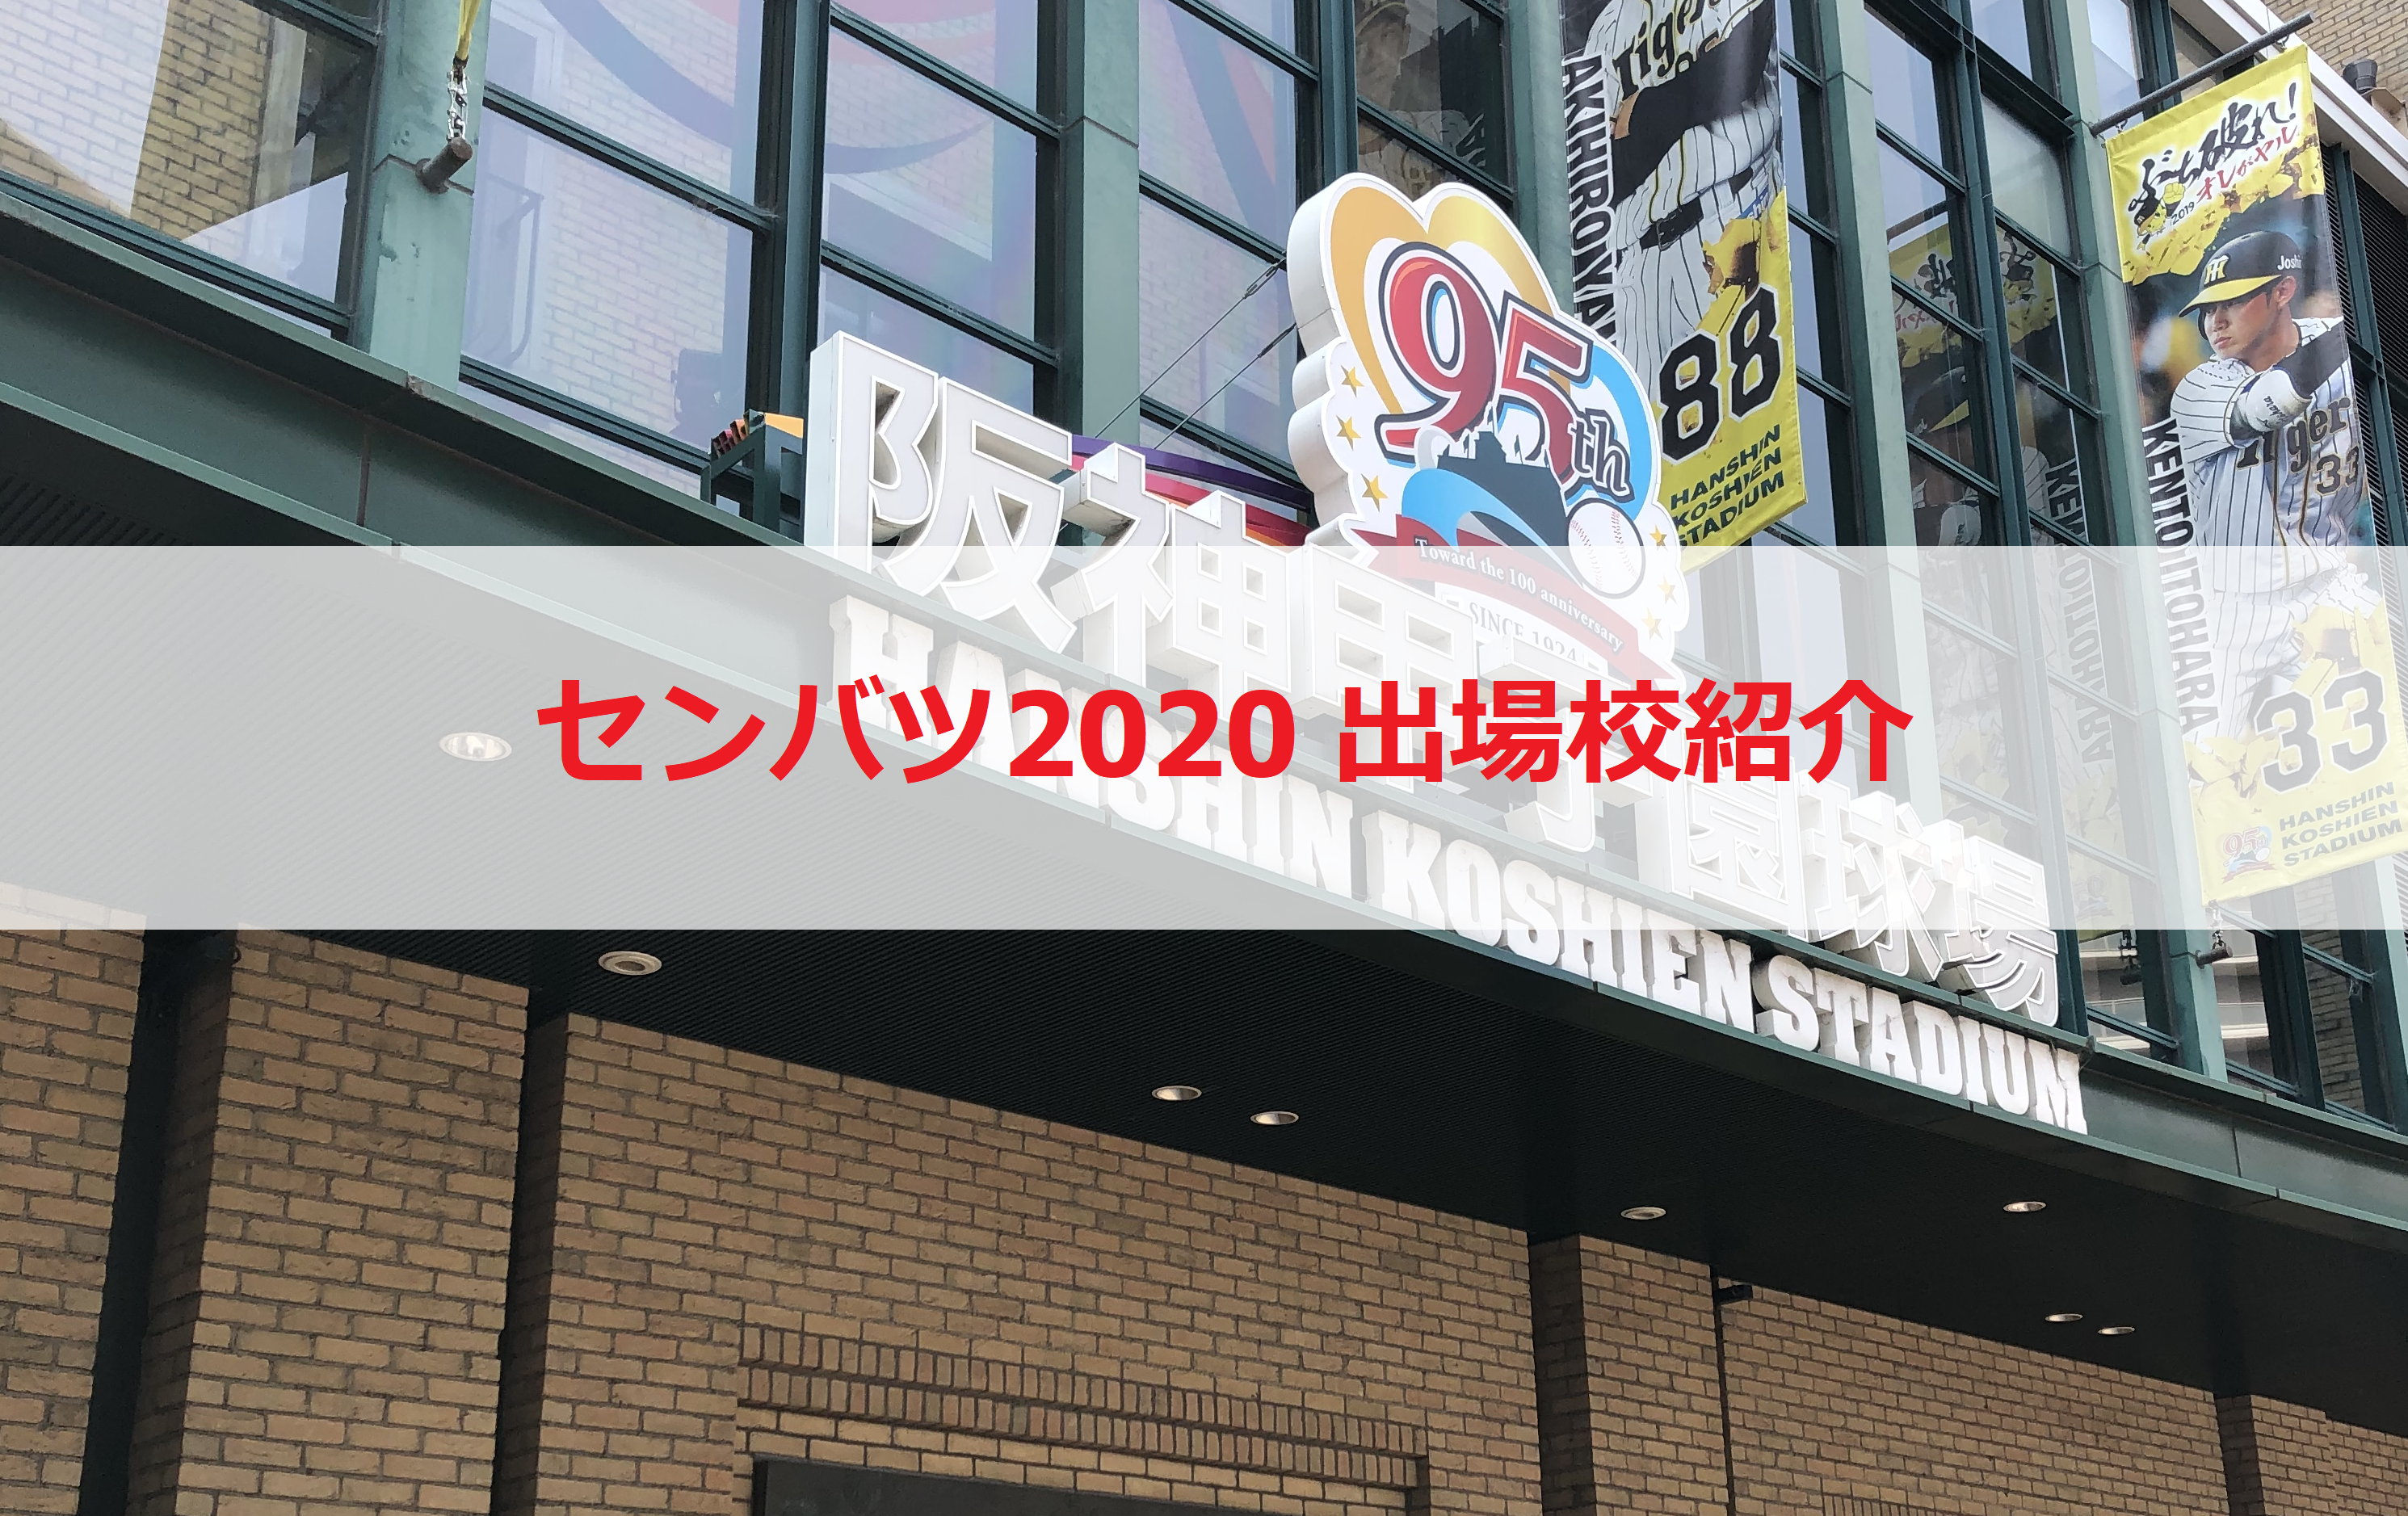 You are currently viewing センバツ2020 履正社高校　ベンチ入りメンバーや出身中学を紹介！